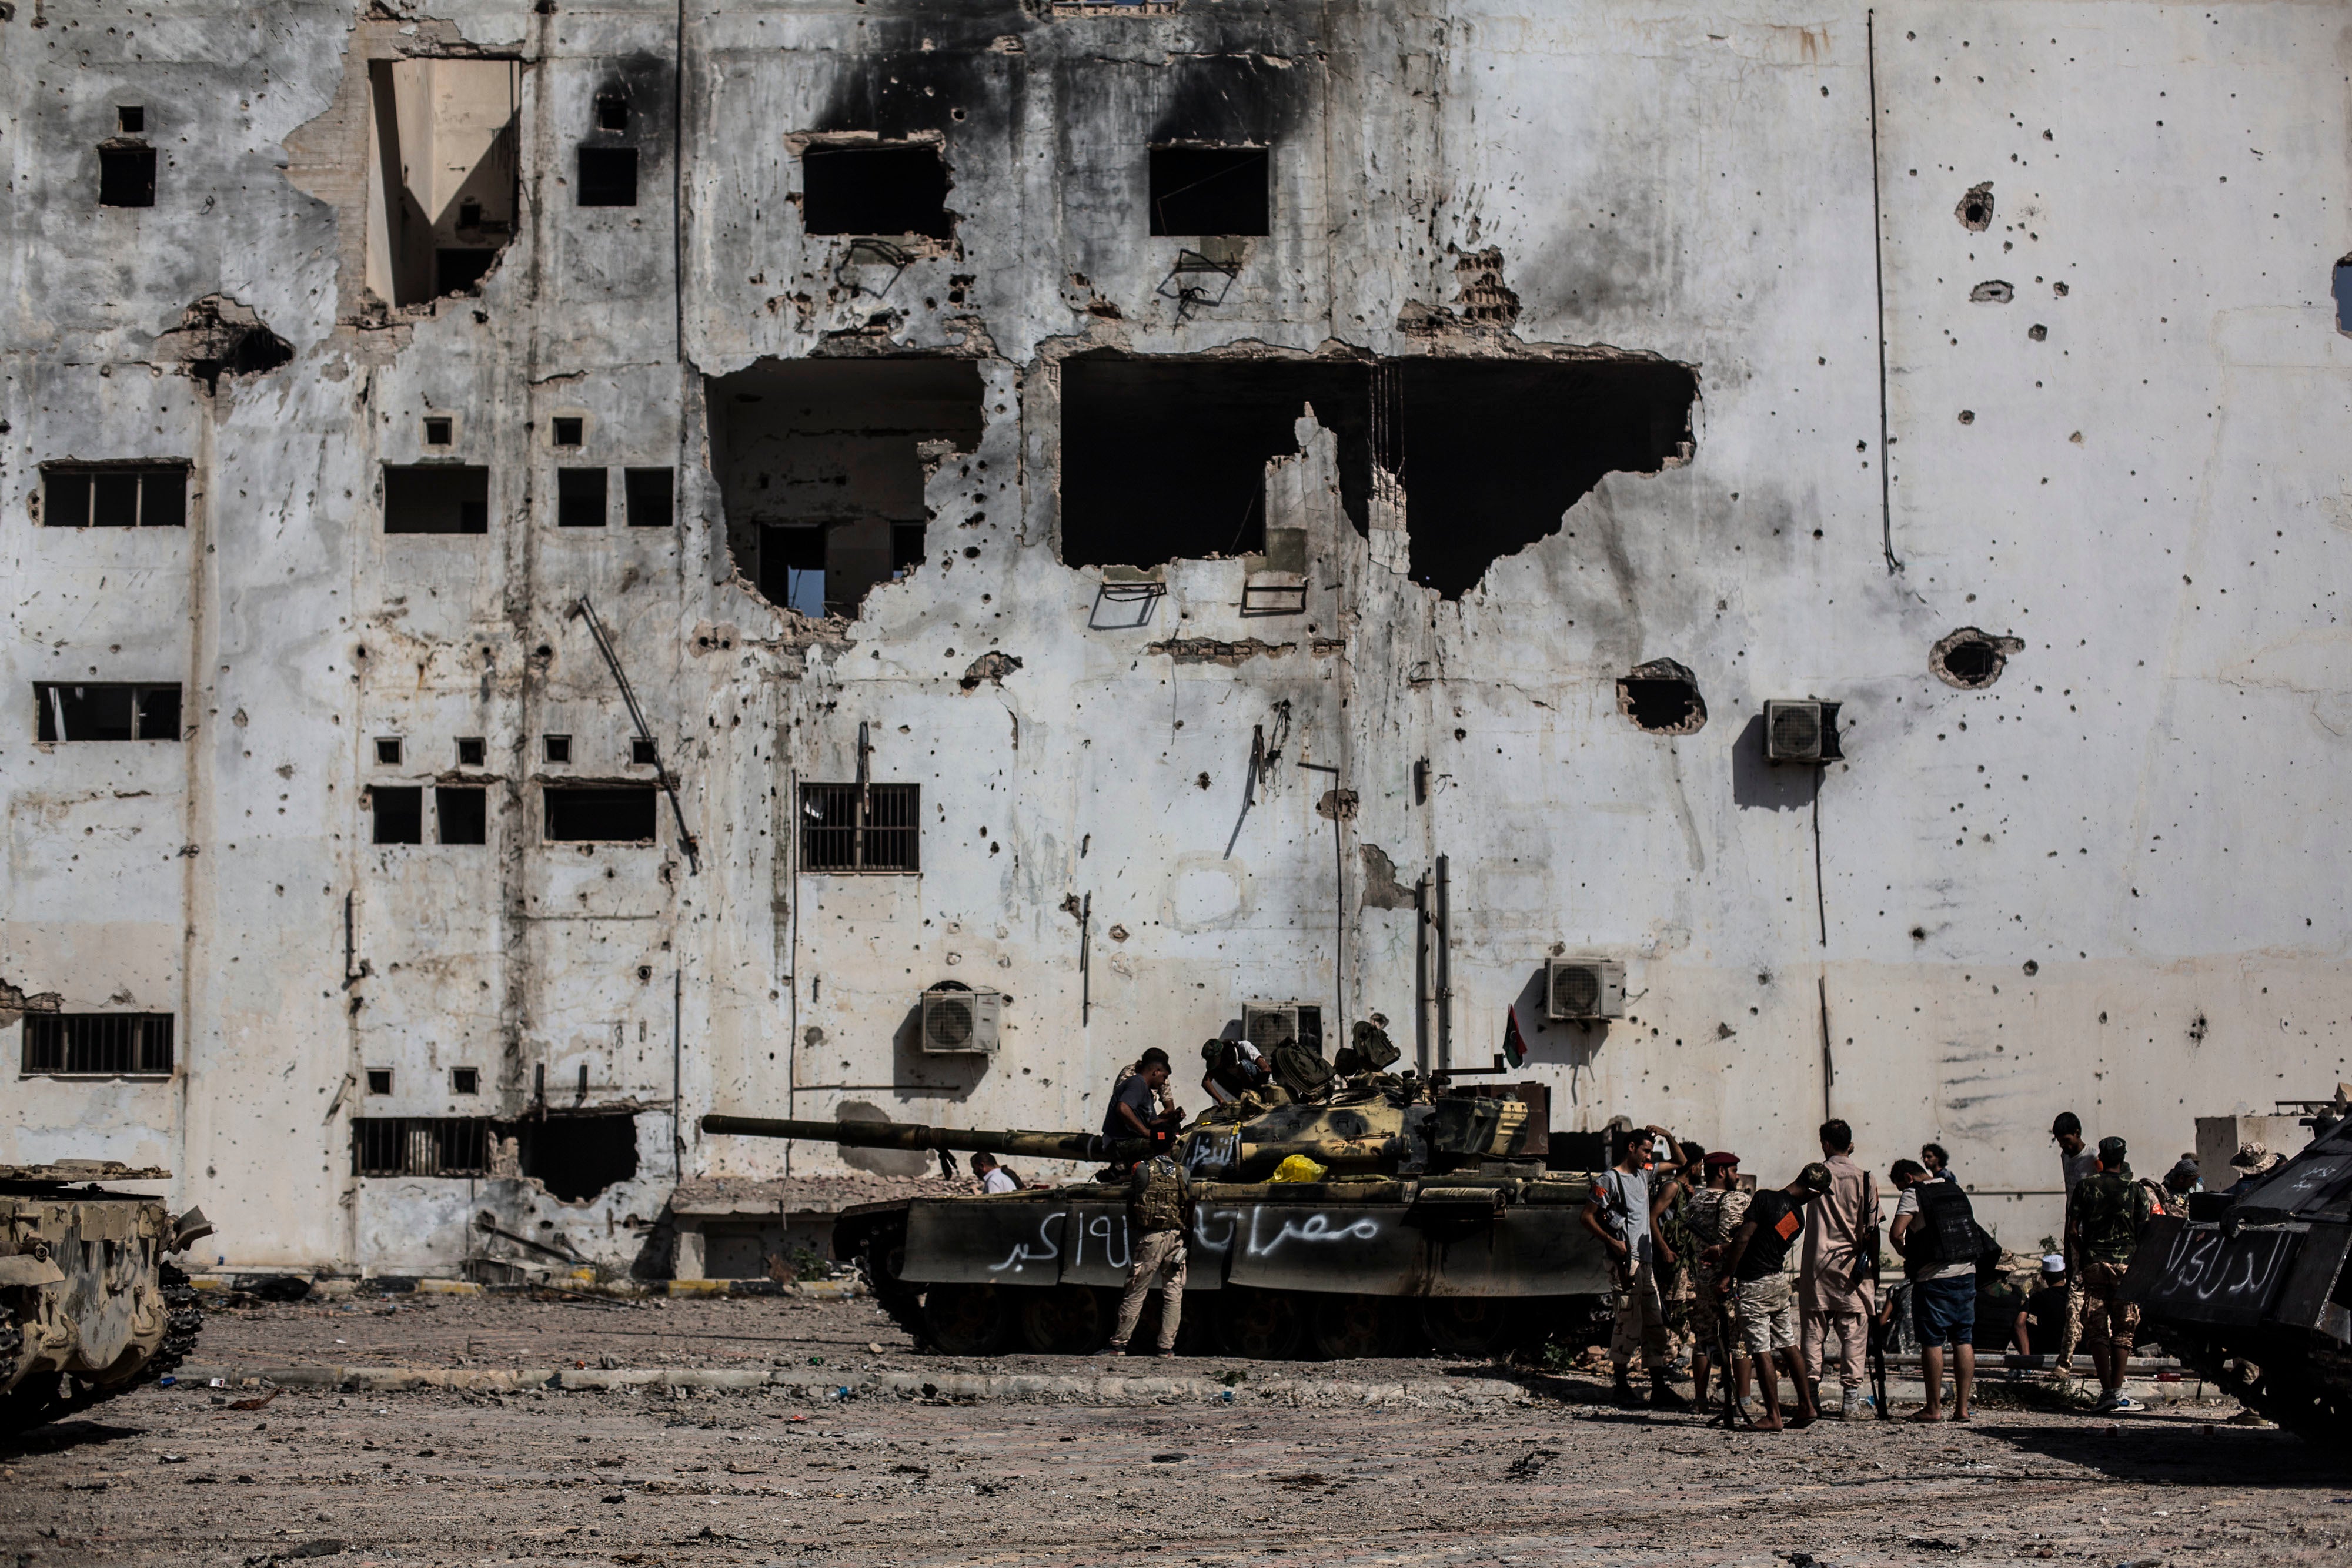 Tripoli in Libya has been the scene of much fighting in recent years